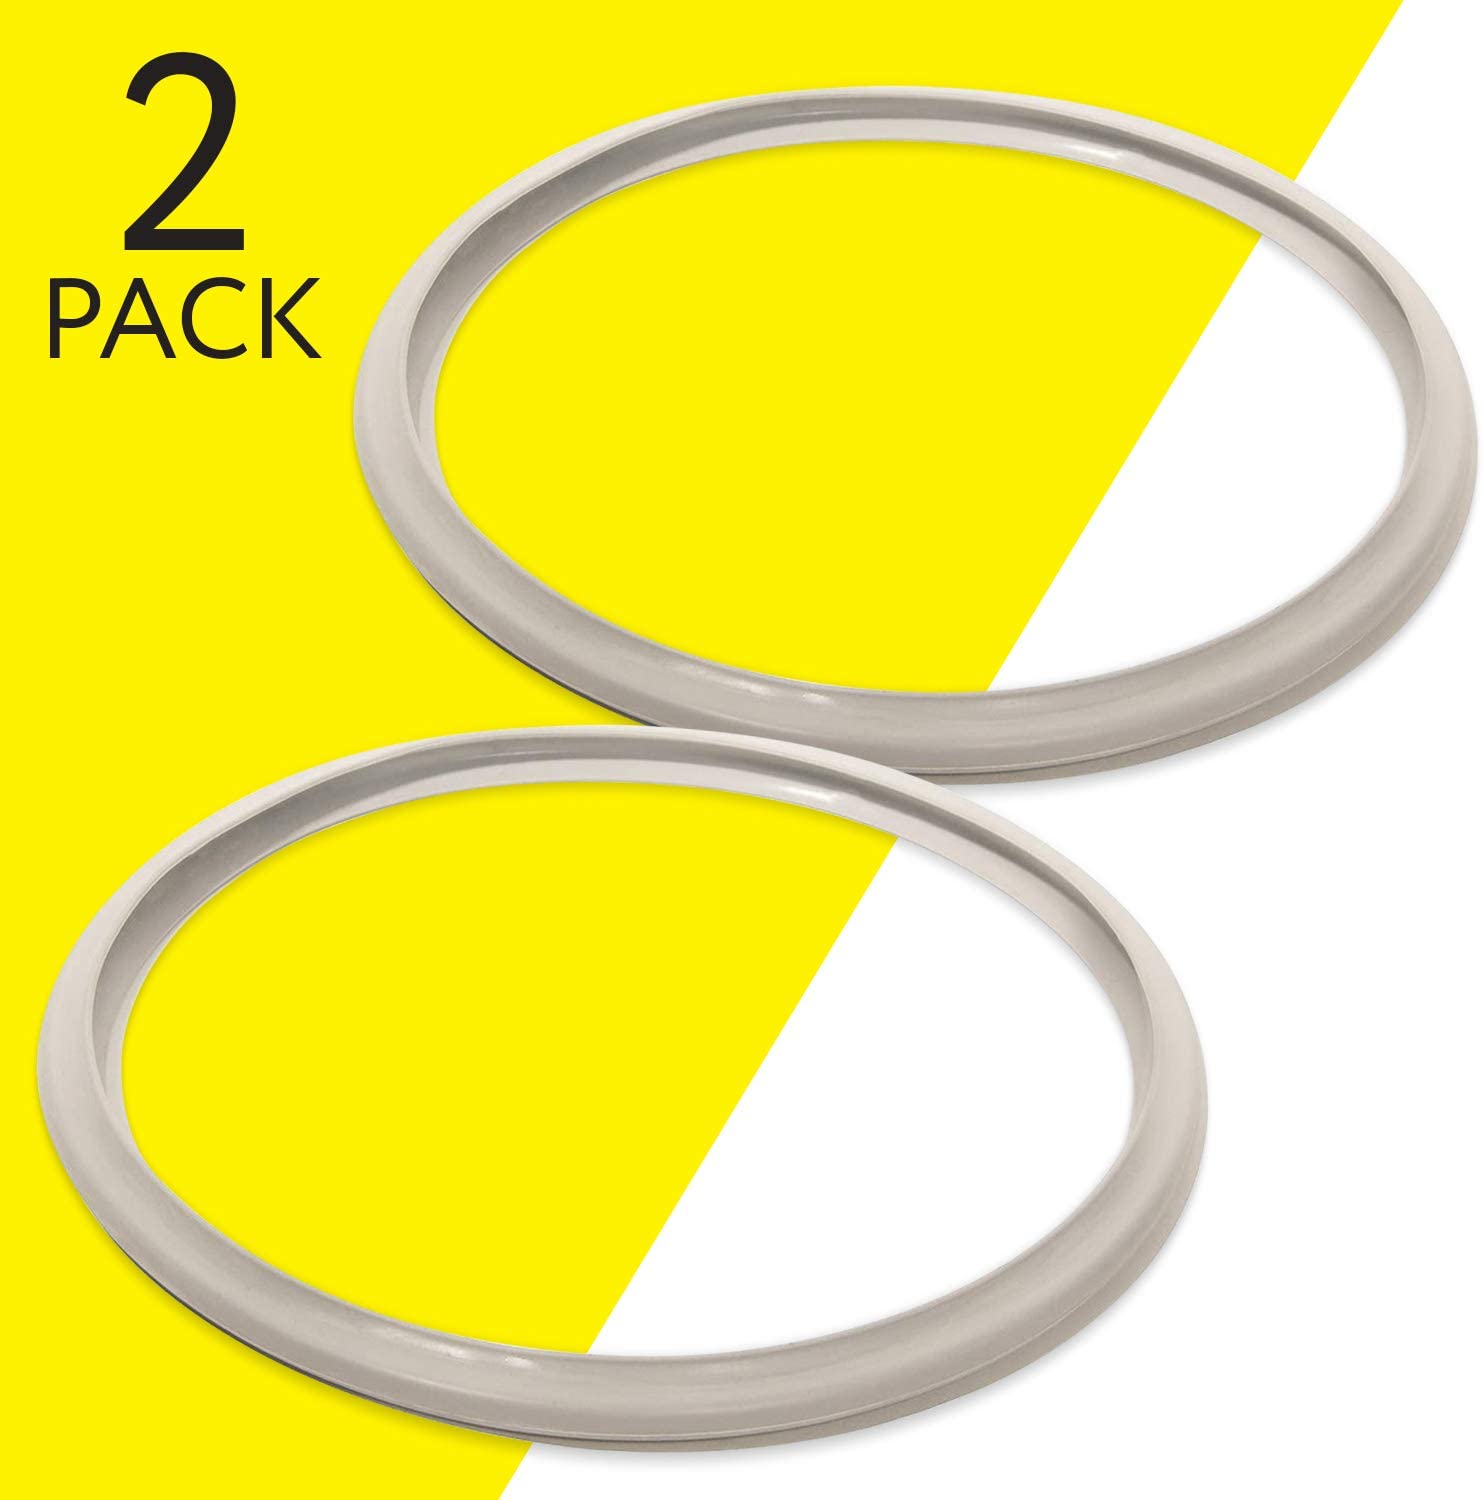 Impresa - 10 inch Fagor Pressure Cooker Replacement Gasket - Fits Many 8 and 10 Quart Fagor Stovetop Models (2 Pack) - image 5 of 5